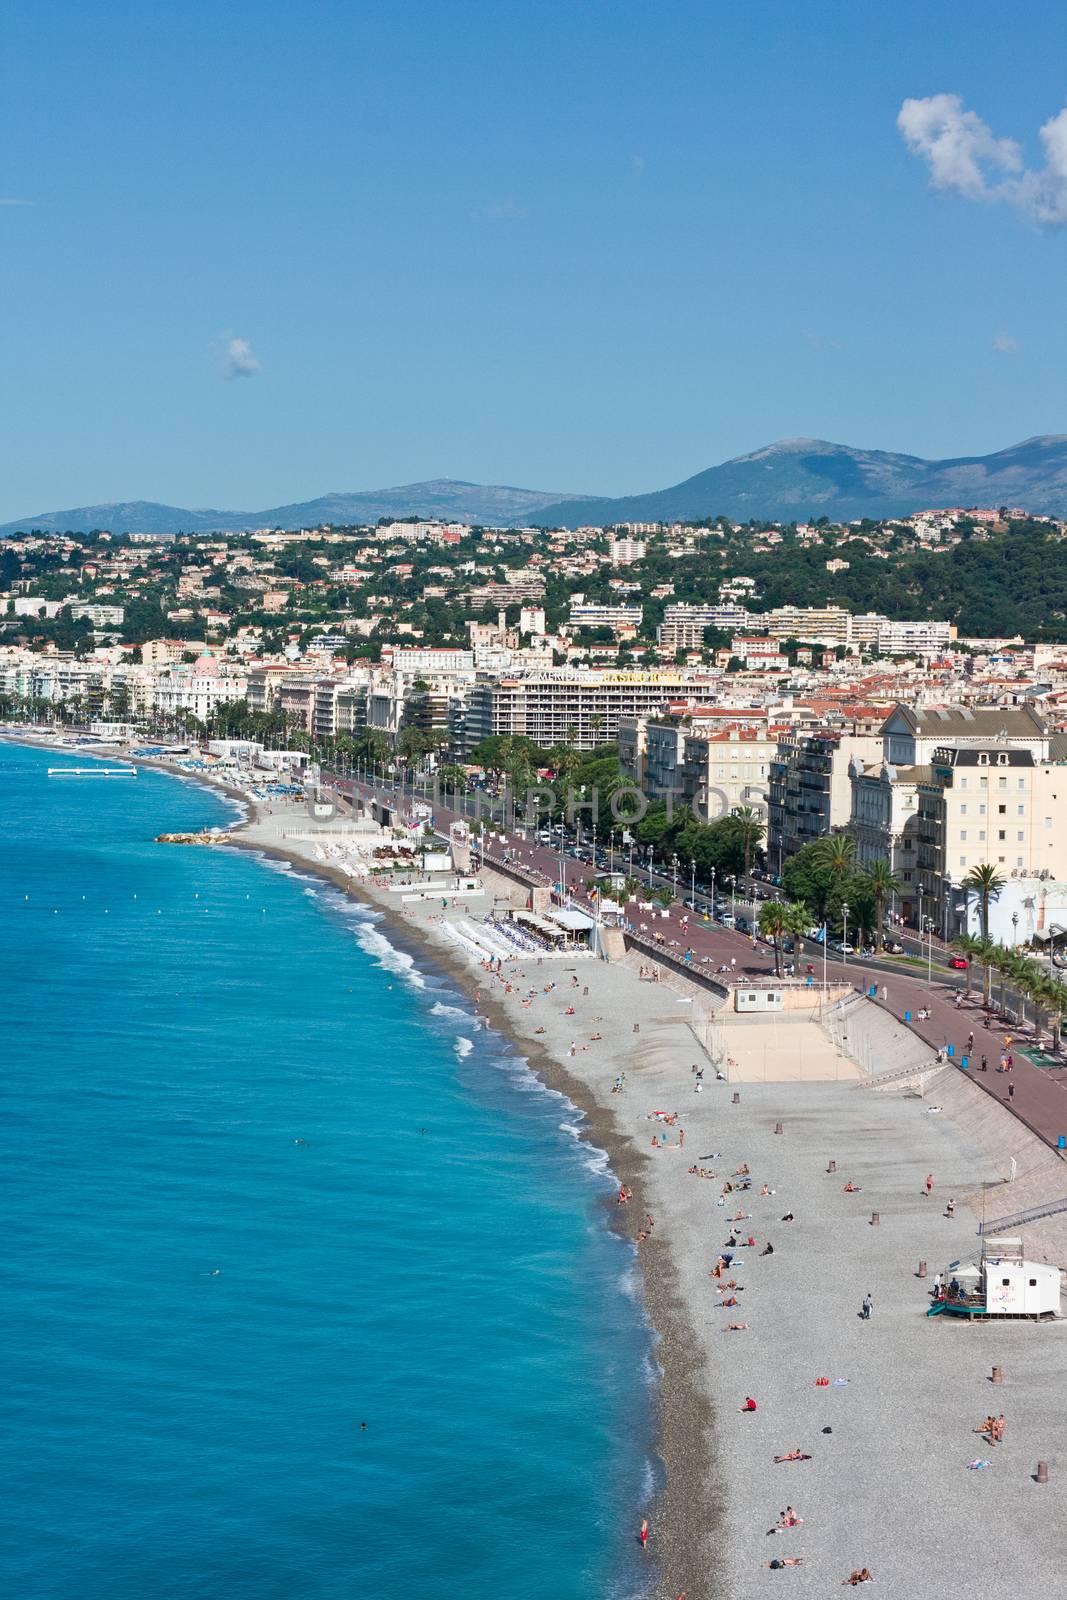 Beach in France, Nice, Prommenade des Anglais

